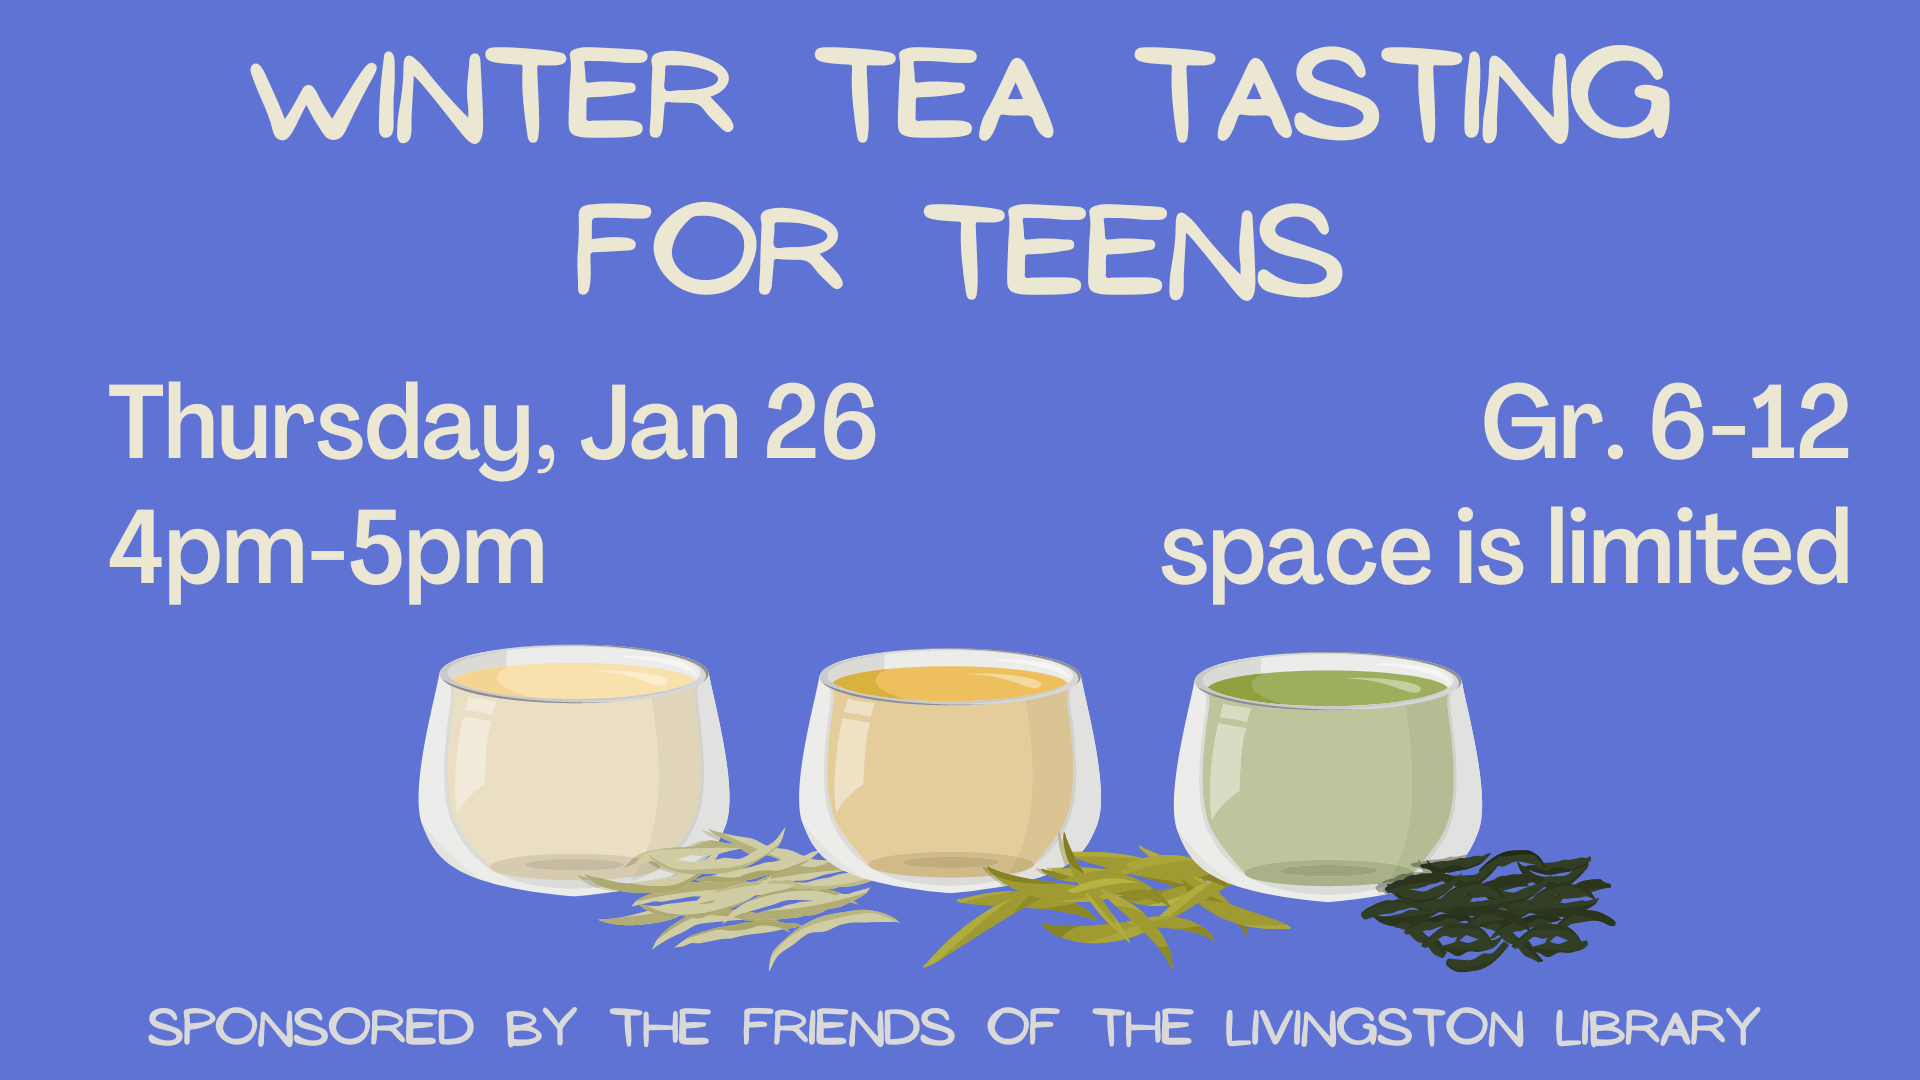 winter tea tasting for teens in white on a royal blue background with graphics of three tea cups at the bottom